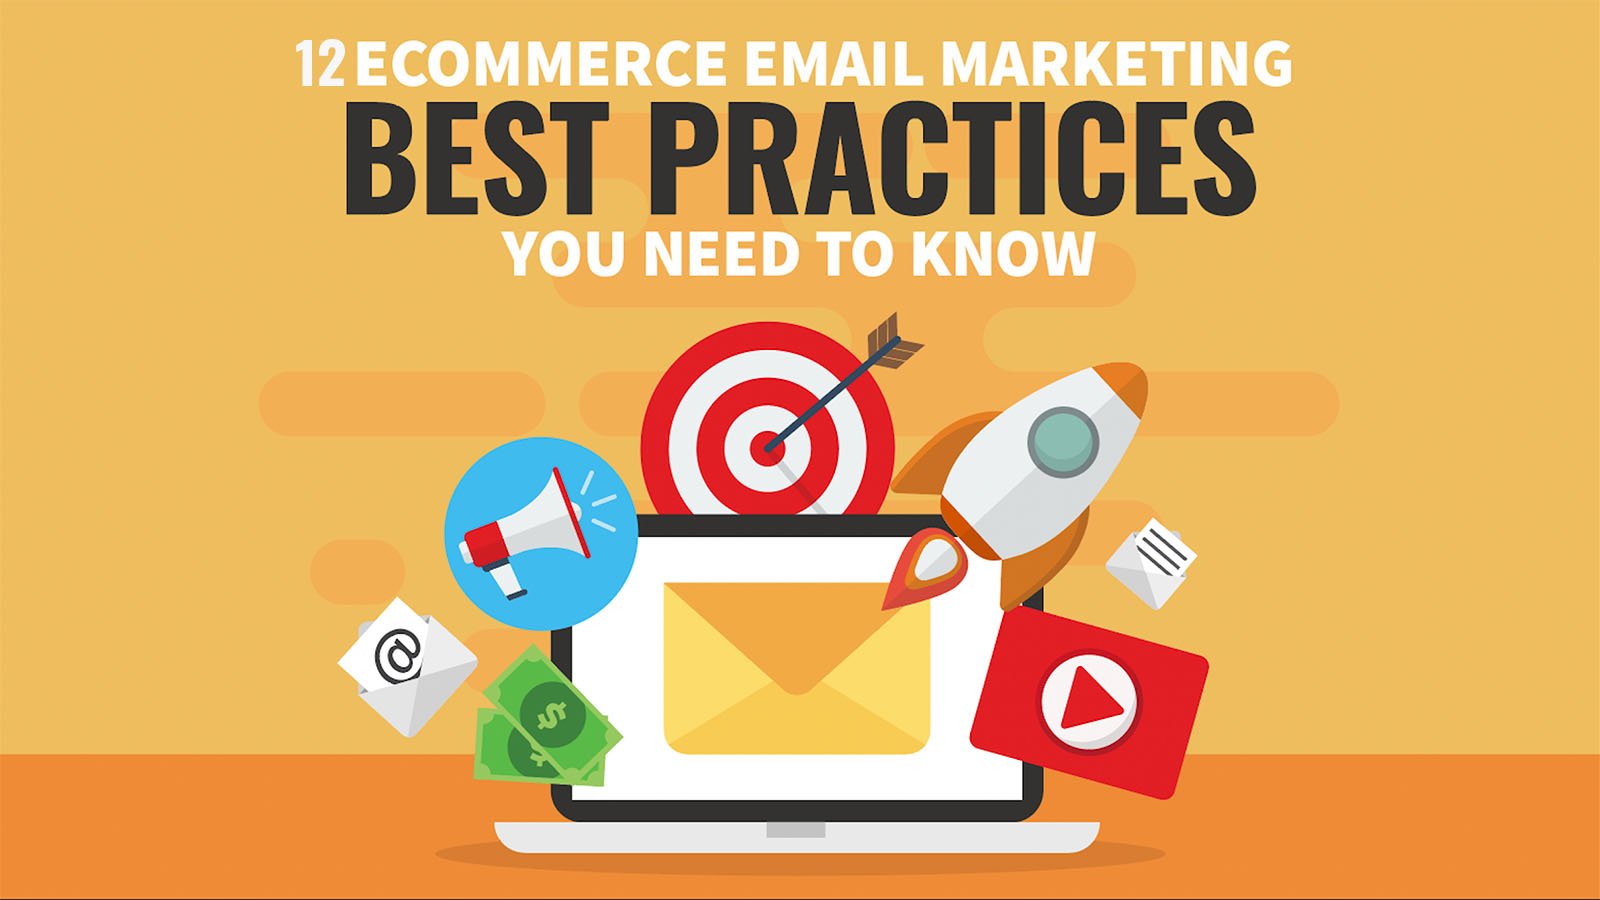 12 Ecommerce Email Marketing Best Practices You Need To Know